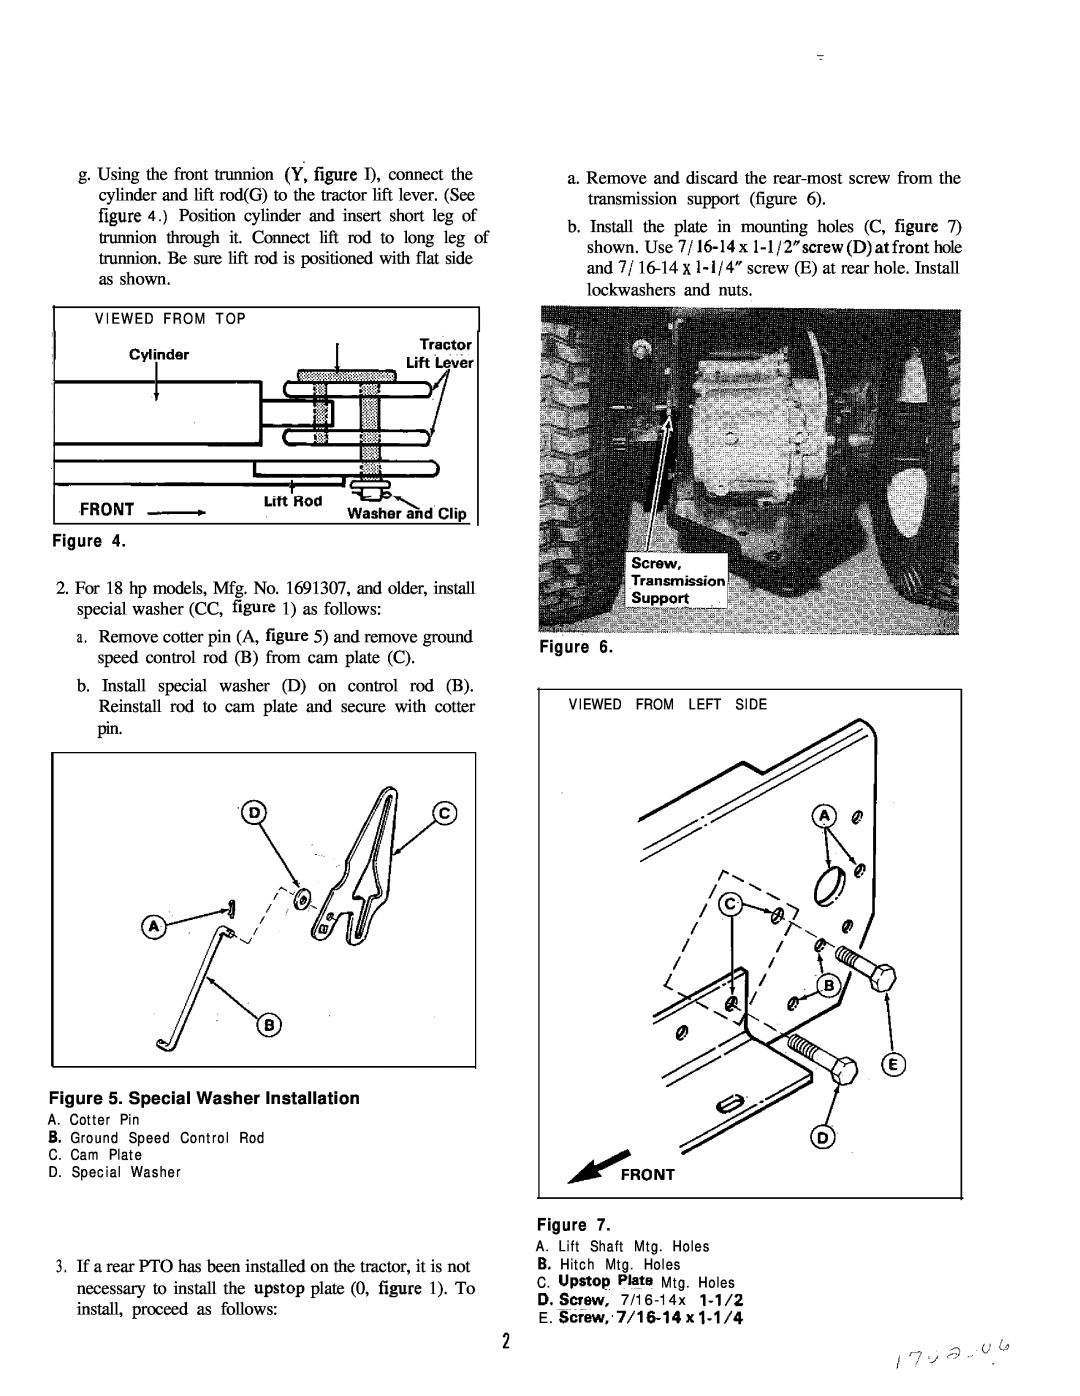 Snapper 1691765 installation instructions b. Install the plate in mounting holes C, figure 